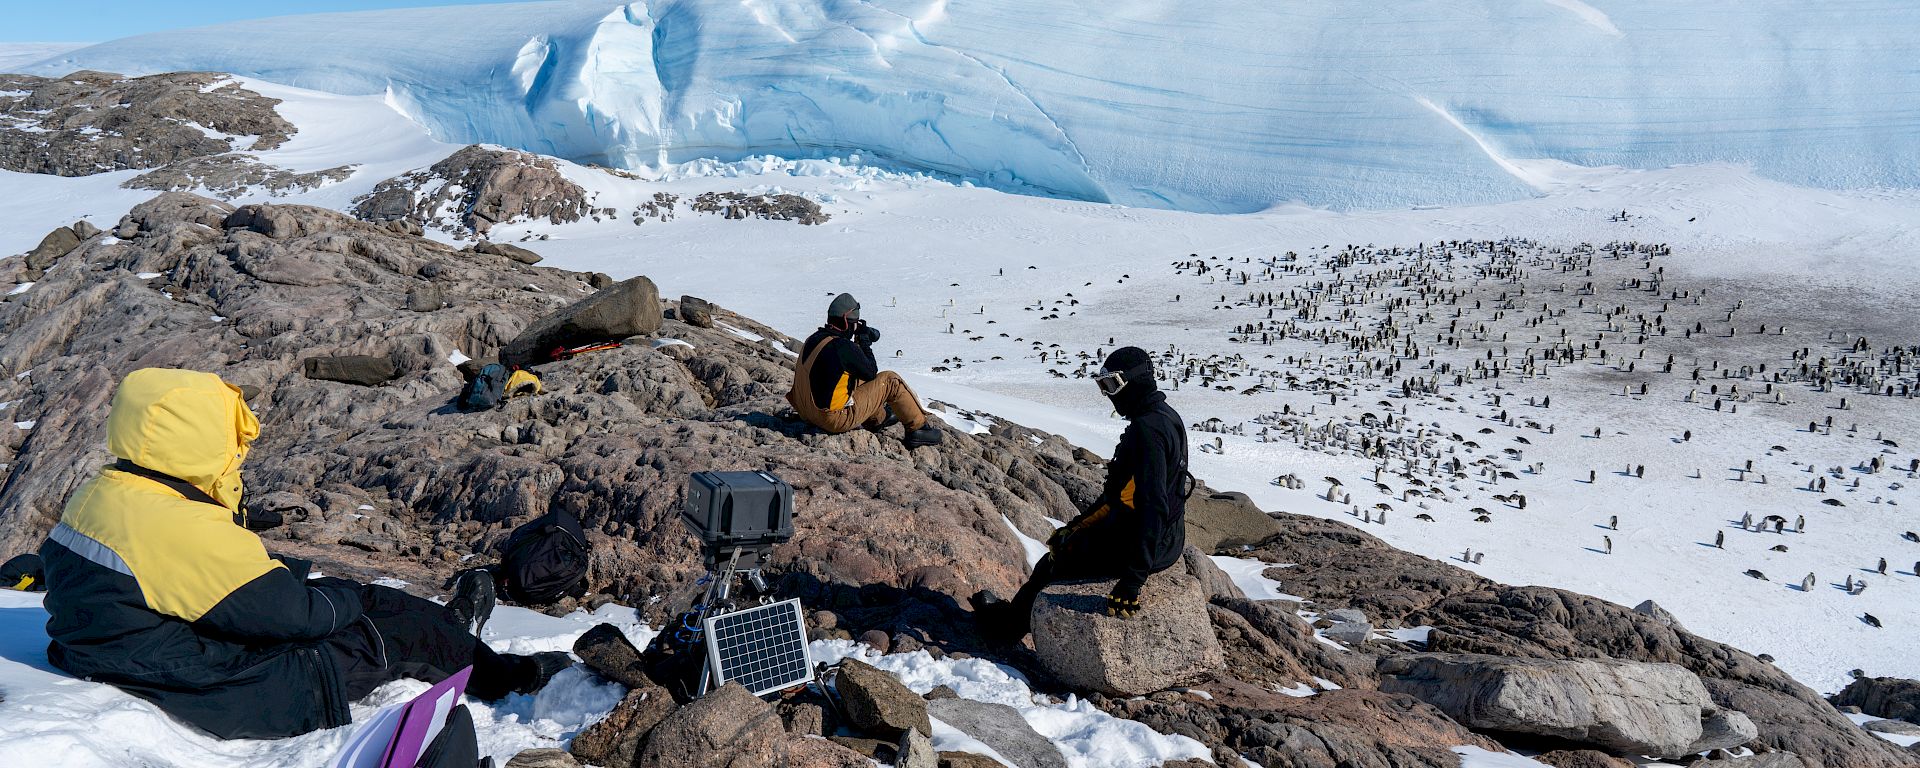 Expeditioners sit on the rocks above a penguin colony with a black box containing a camera. The ice below is covered with black and white birds.